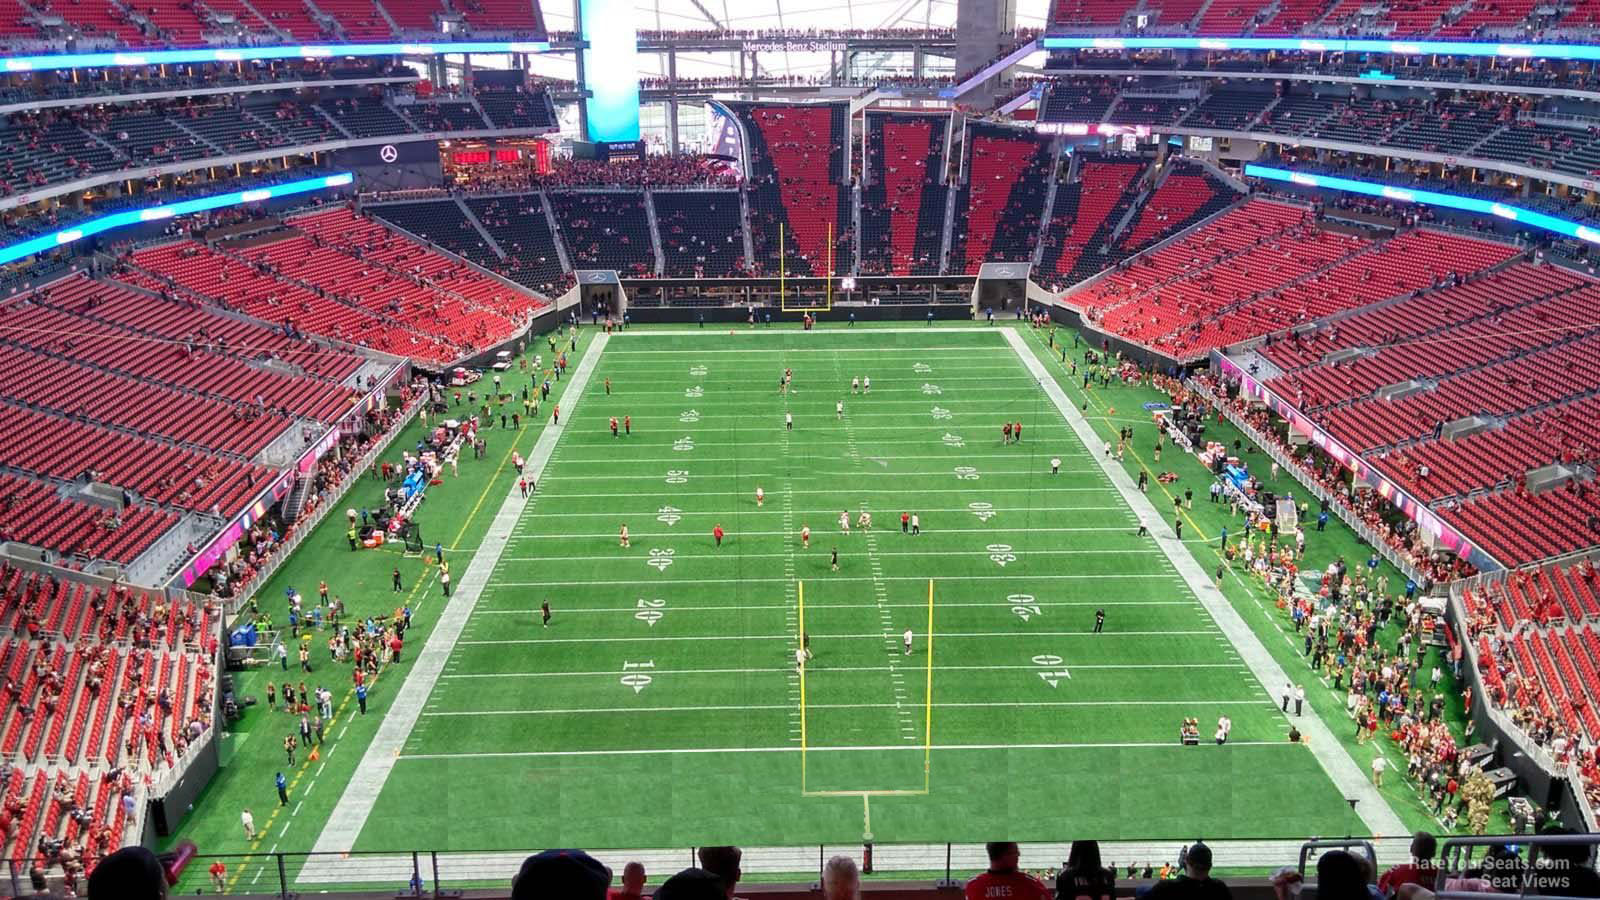 section 326, row 12 seat view  for football - mercedes-benz stadium